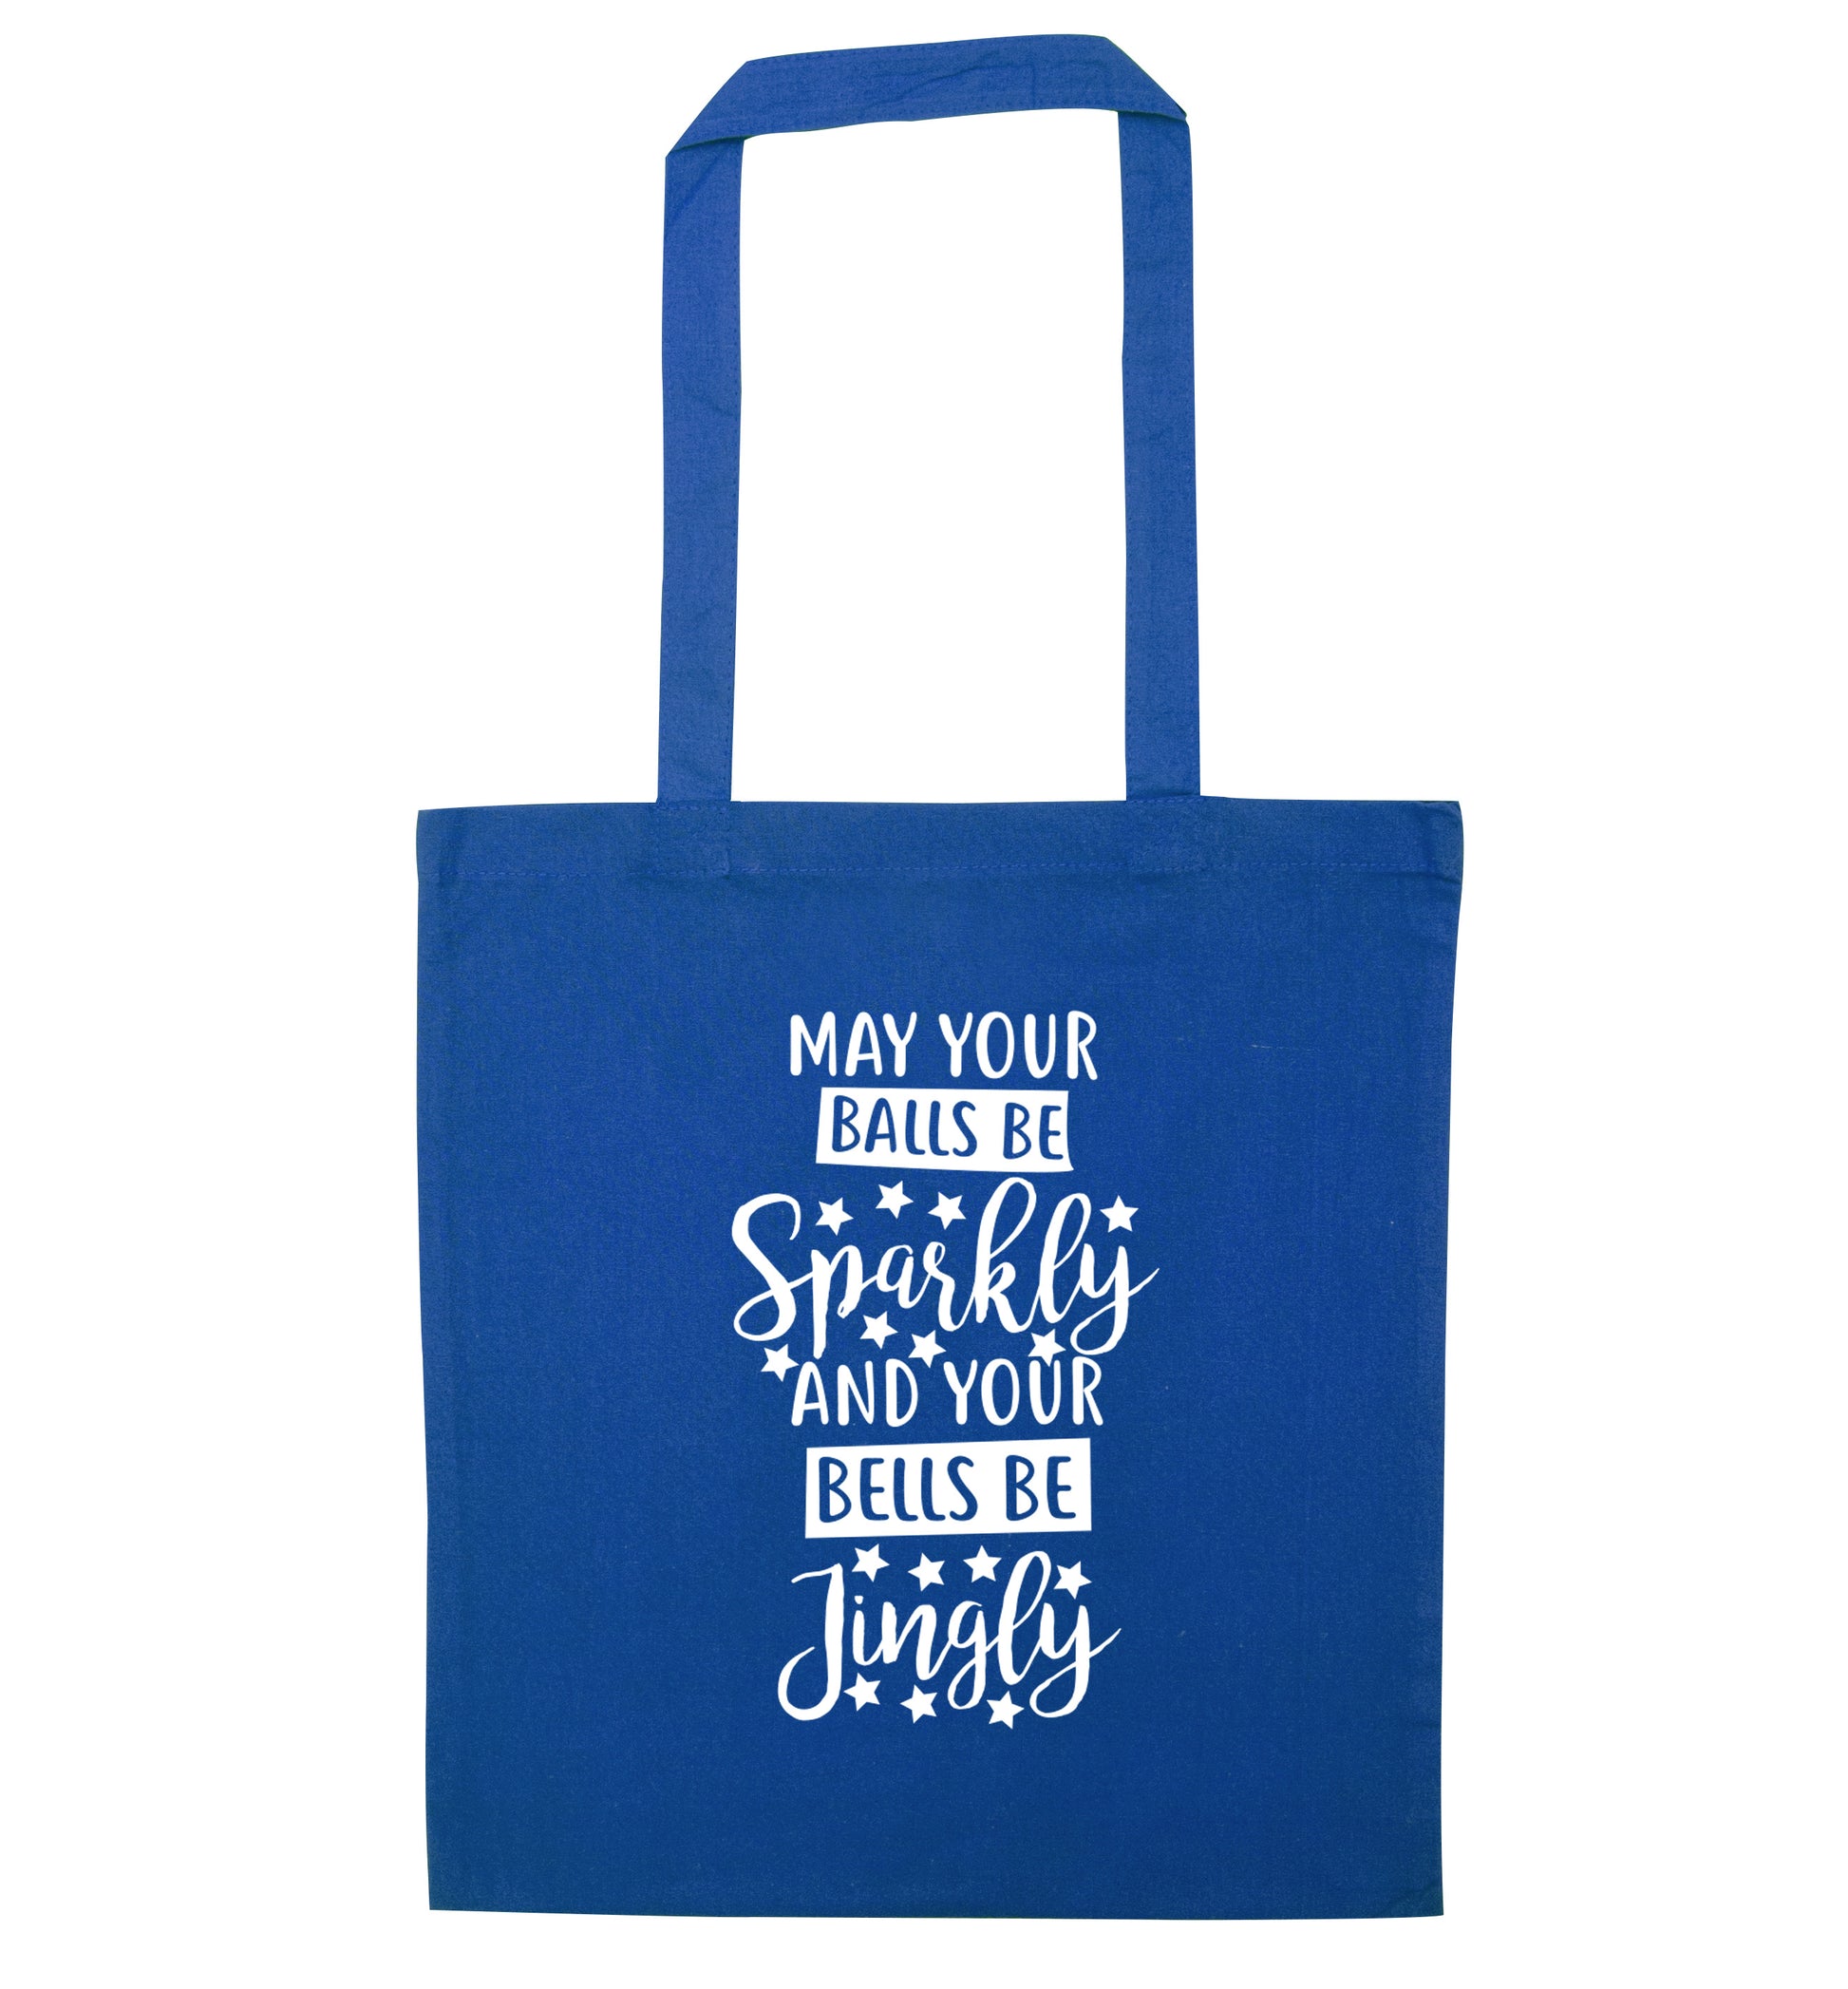 May your balls be sparkly and your bells be jingly blue tote bag